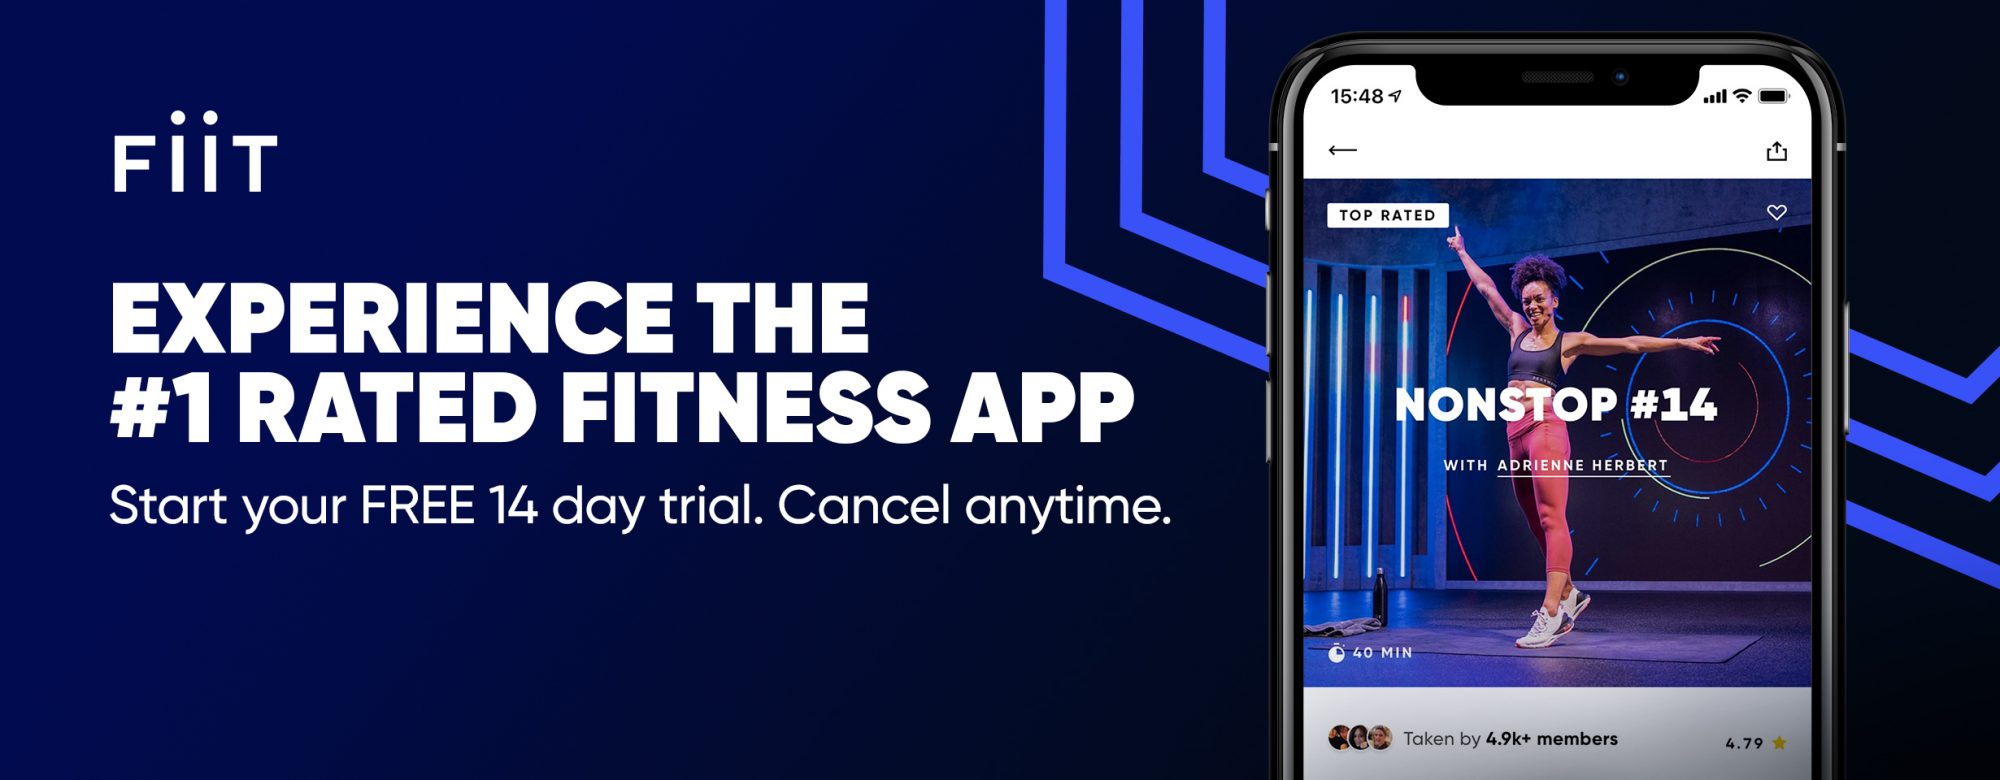 Start your 14 day free trial of the Fiit app - cancel any time